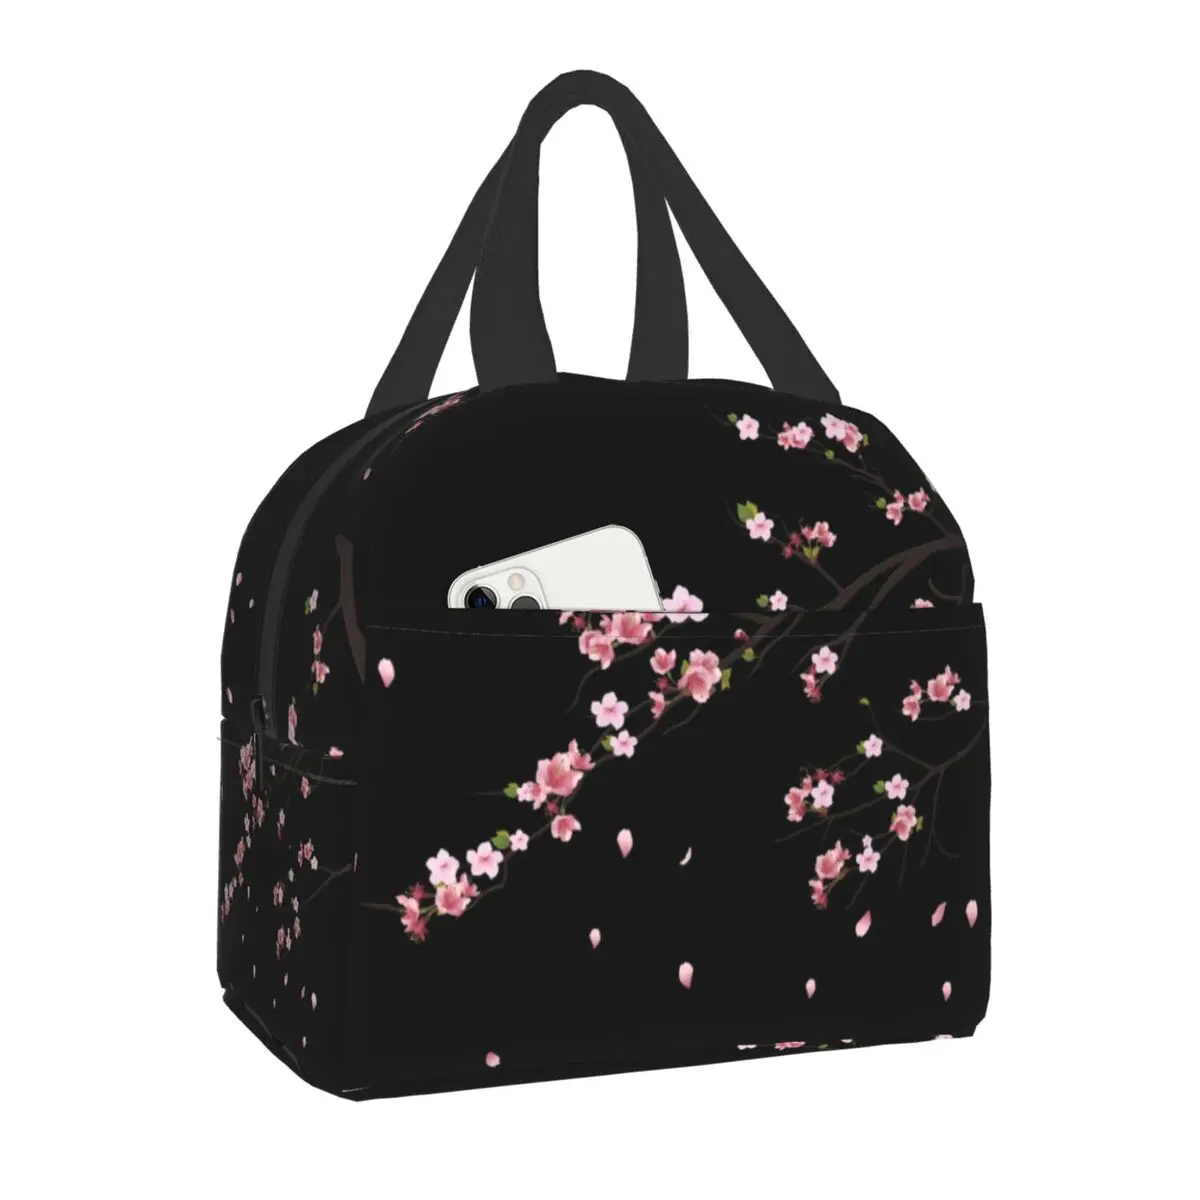 

Japanese Sakura Branch Insulated Lunch Bag for Women Portable Waterproof Flower Floral Cherry Blossom Cooler Thermal Bento Box